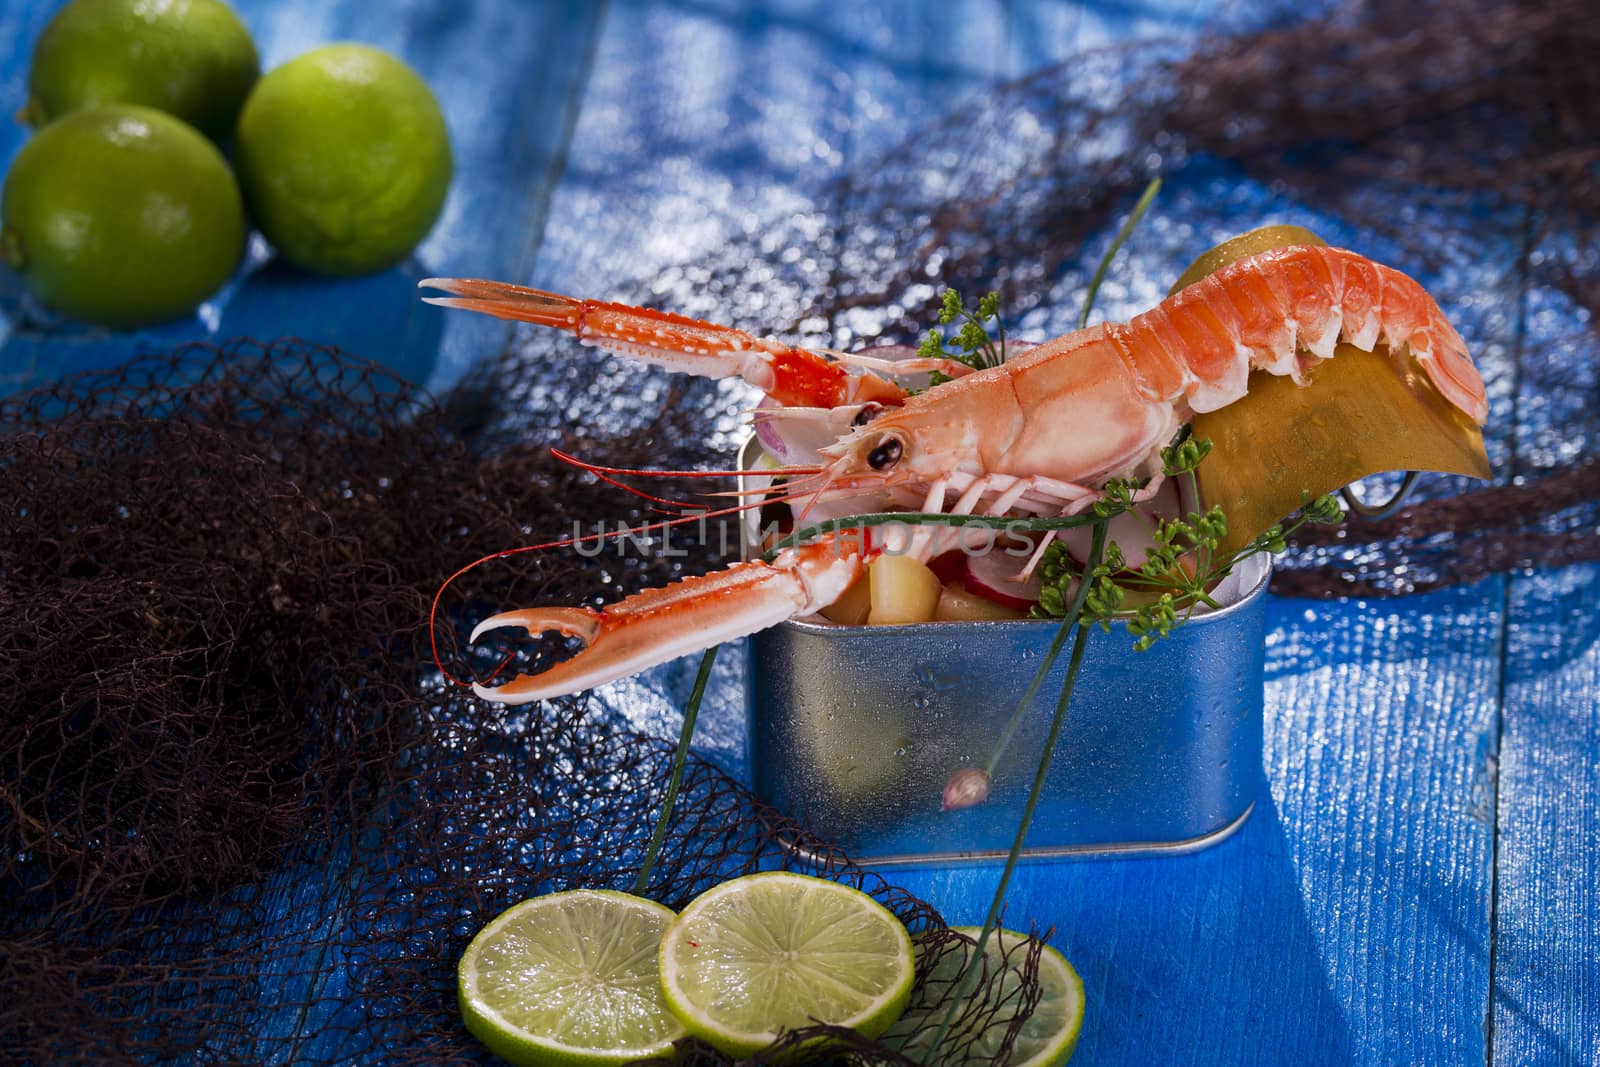 Presentation of a crustacean with mixed vegetables in box 